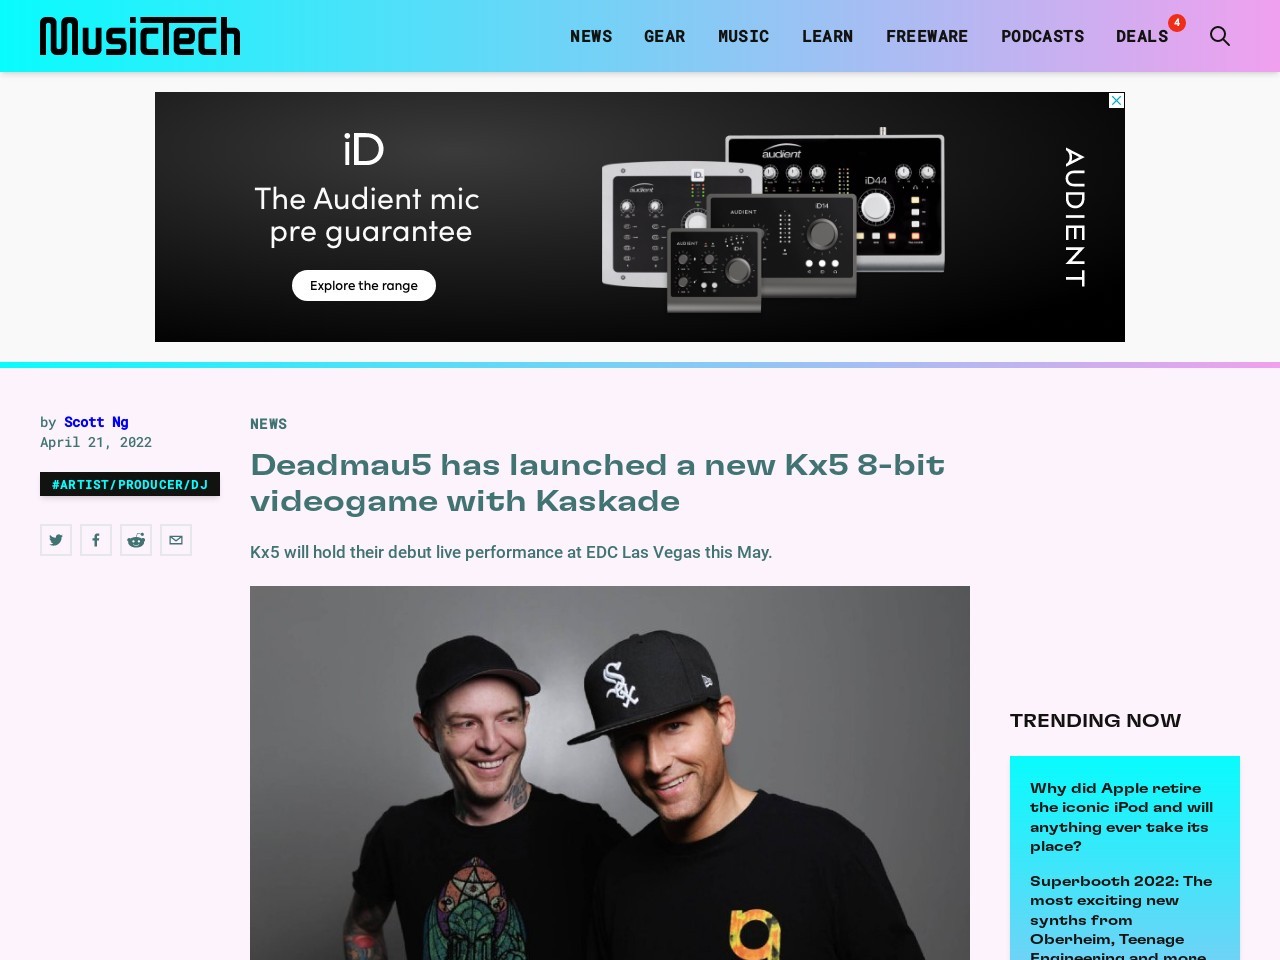 Deadmau5 has launched a new Kx5 8-bit videogame with Kaskade | MusicTech